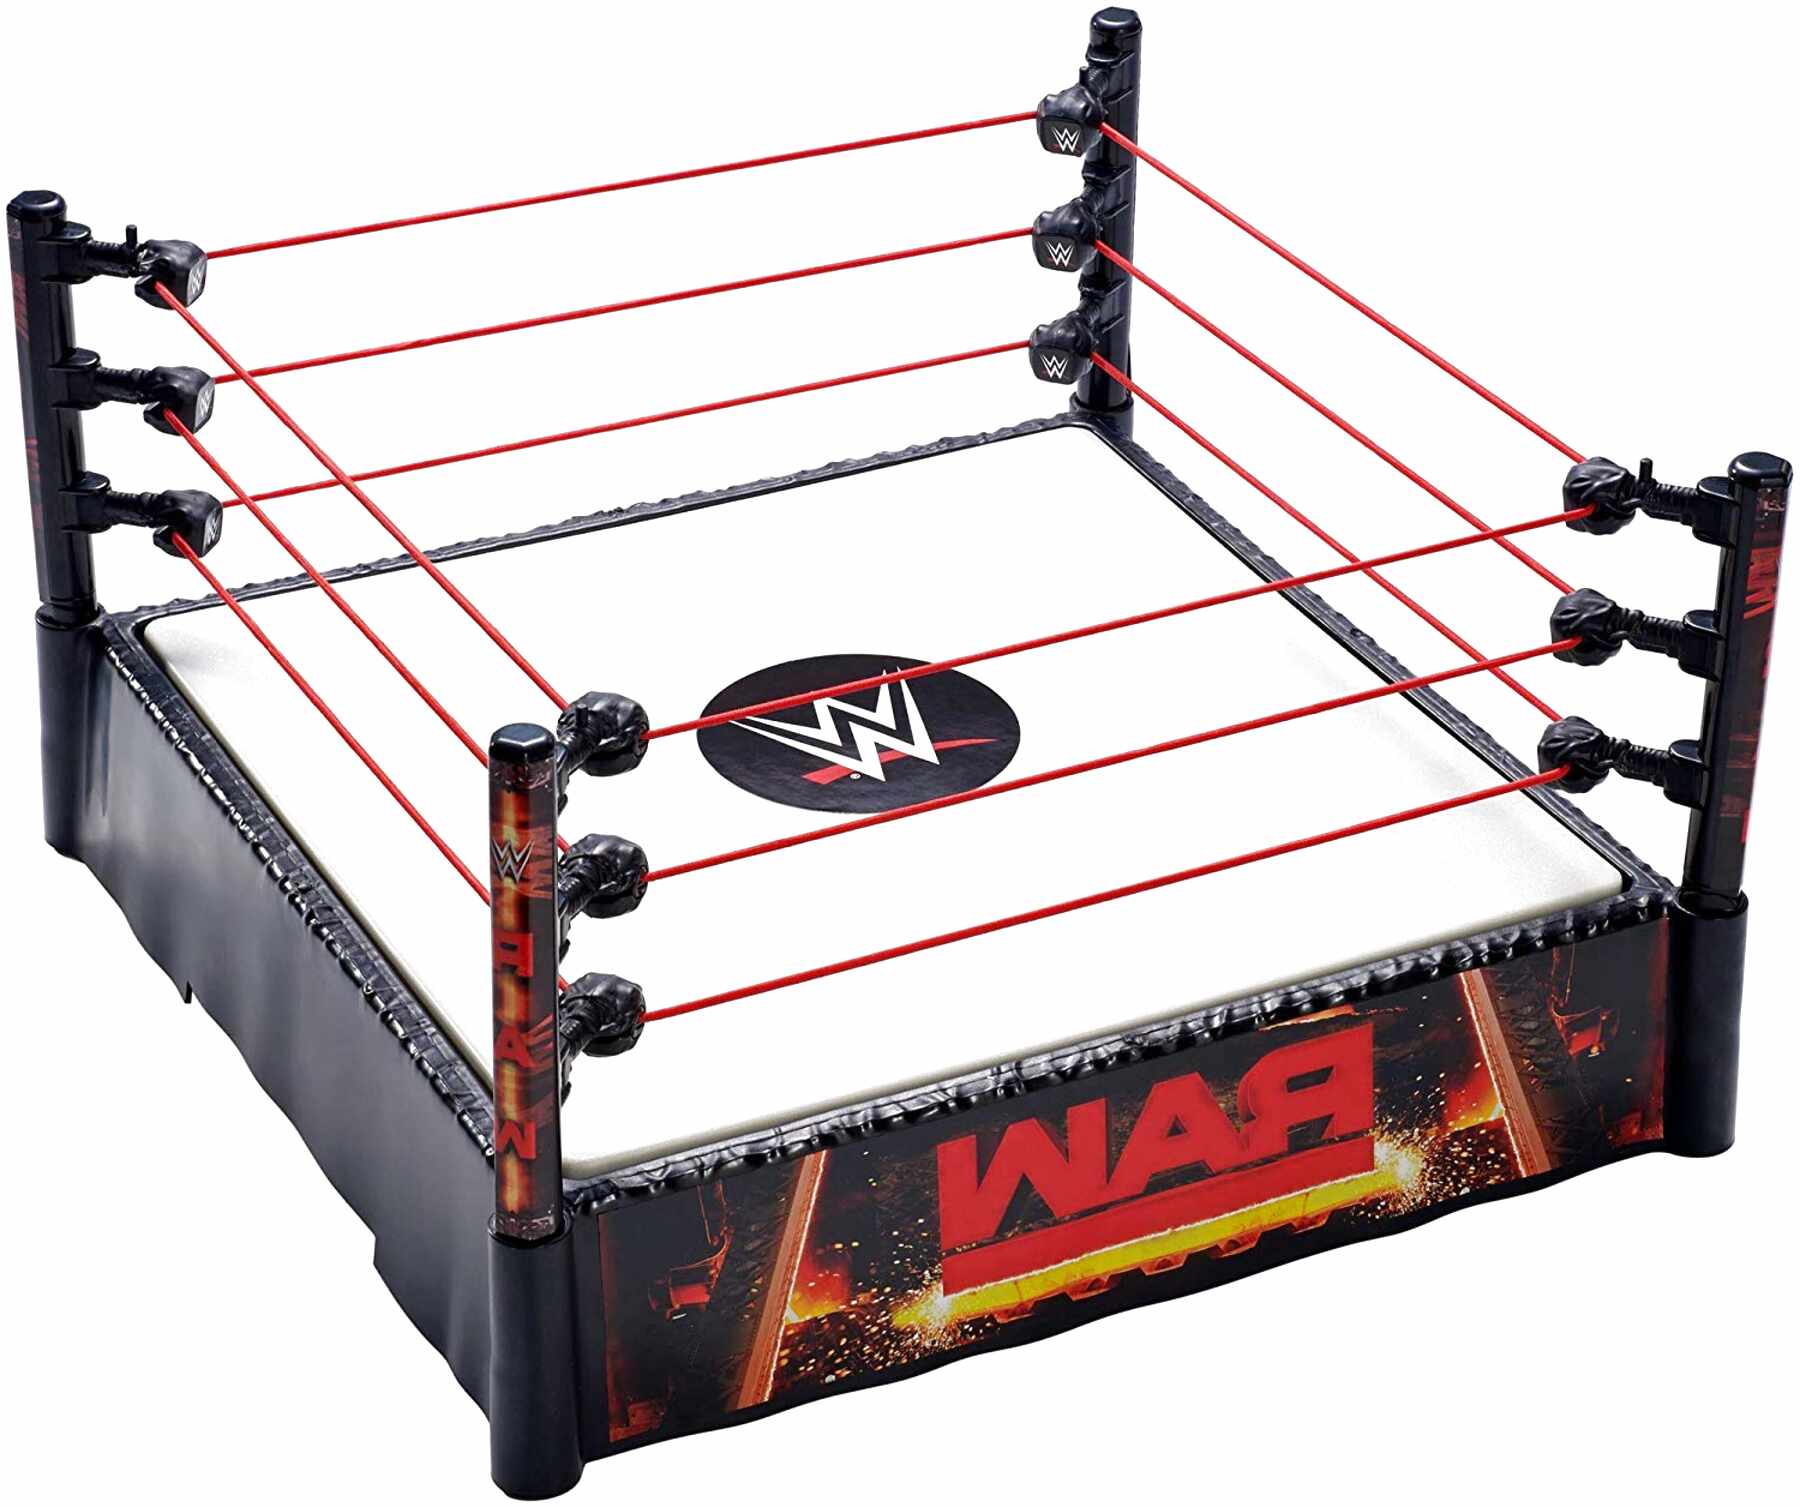 Wwe Raw Ring for sale in UK 64 used Wwe Raw Rings